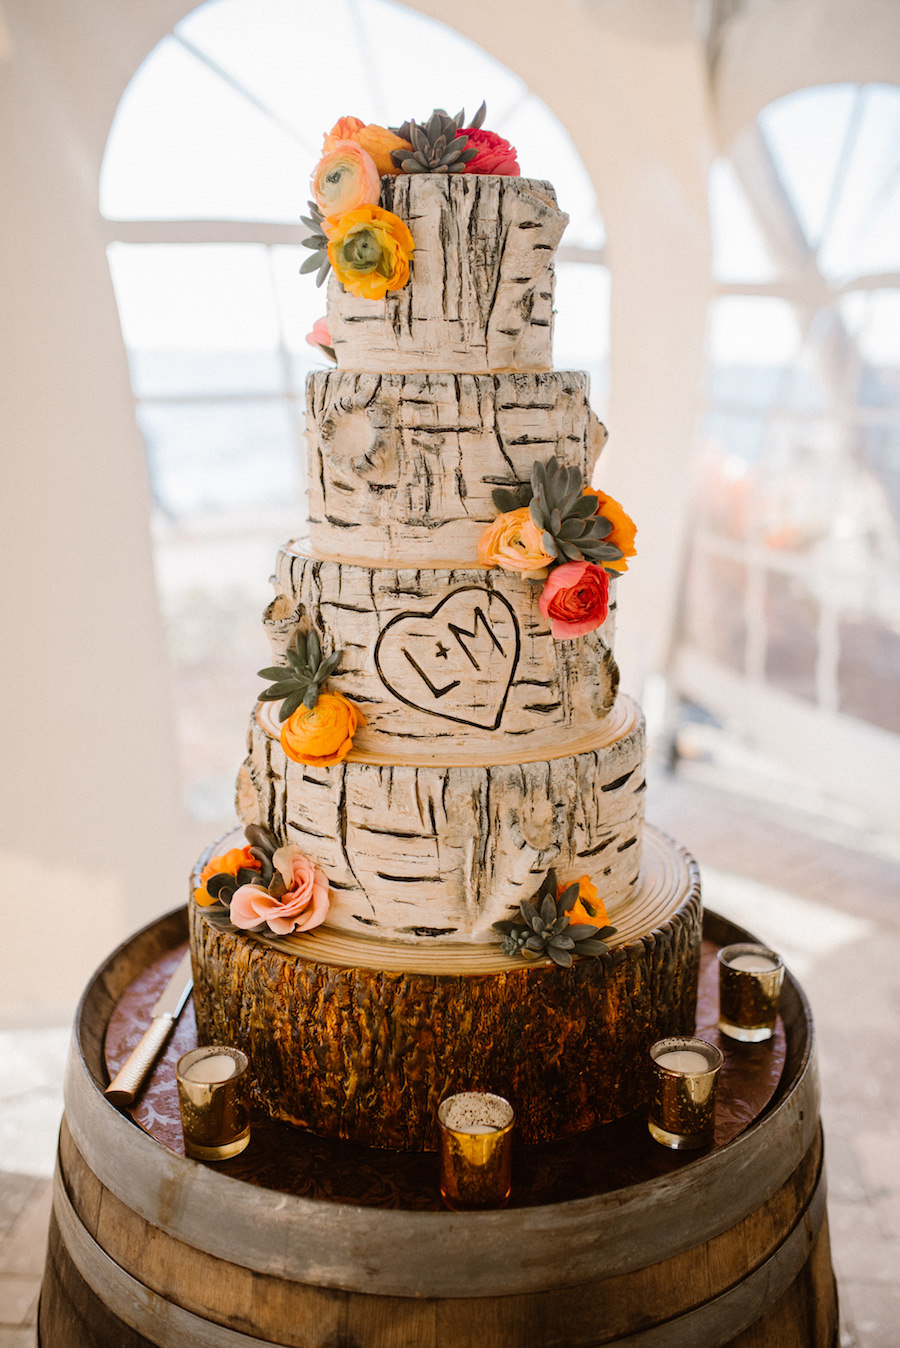 Four Tier Round Birch Bark Wedding Cake with Initials and Pink and Orange Roses with Succulents on Tree Round Cakestand and Rustic Barrel